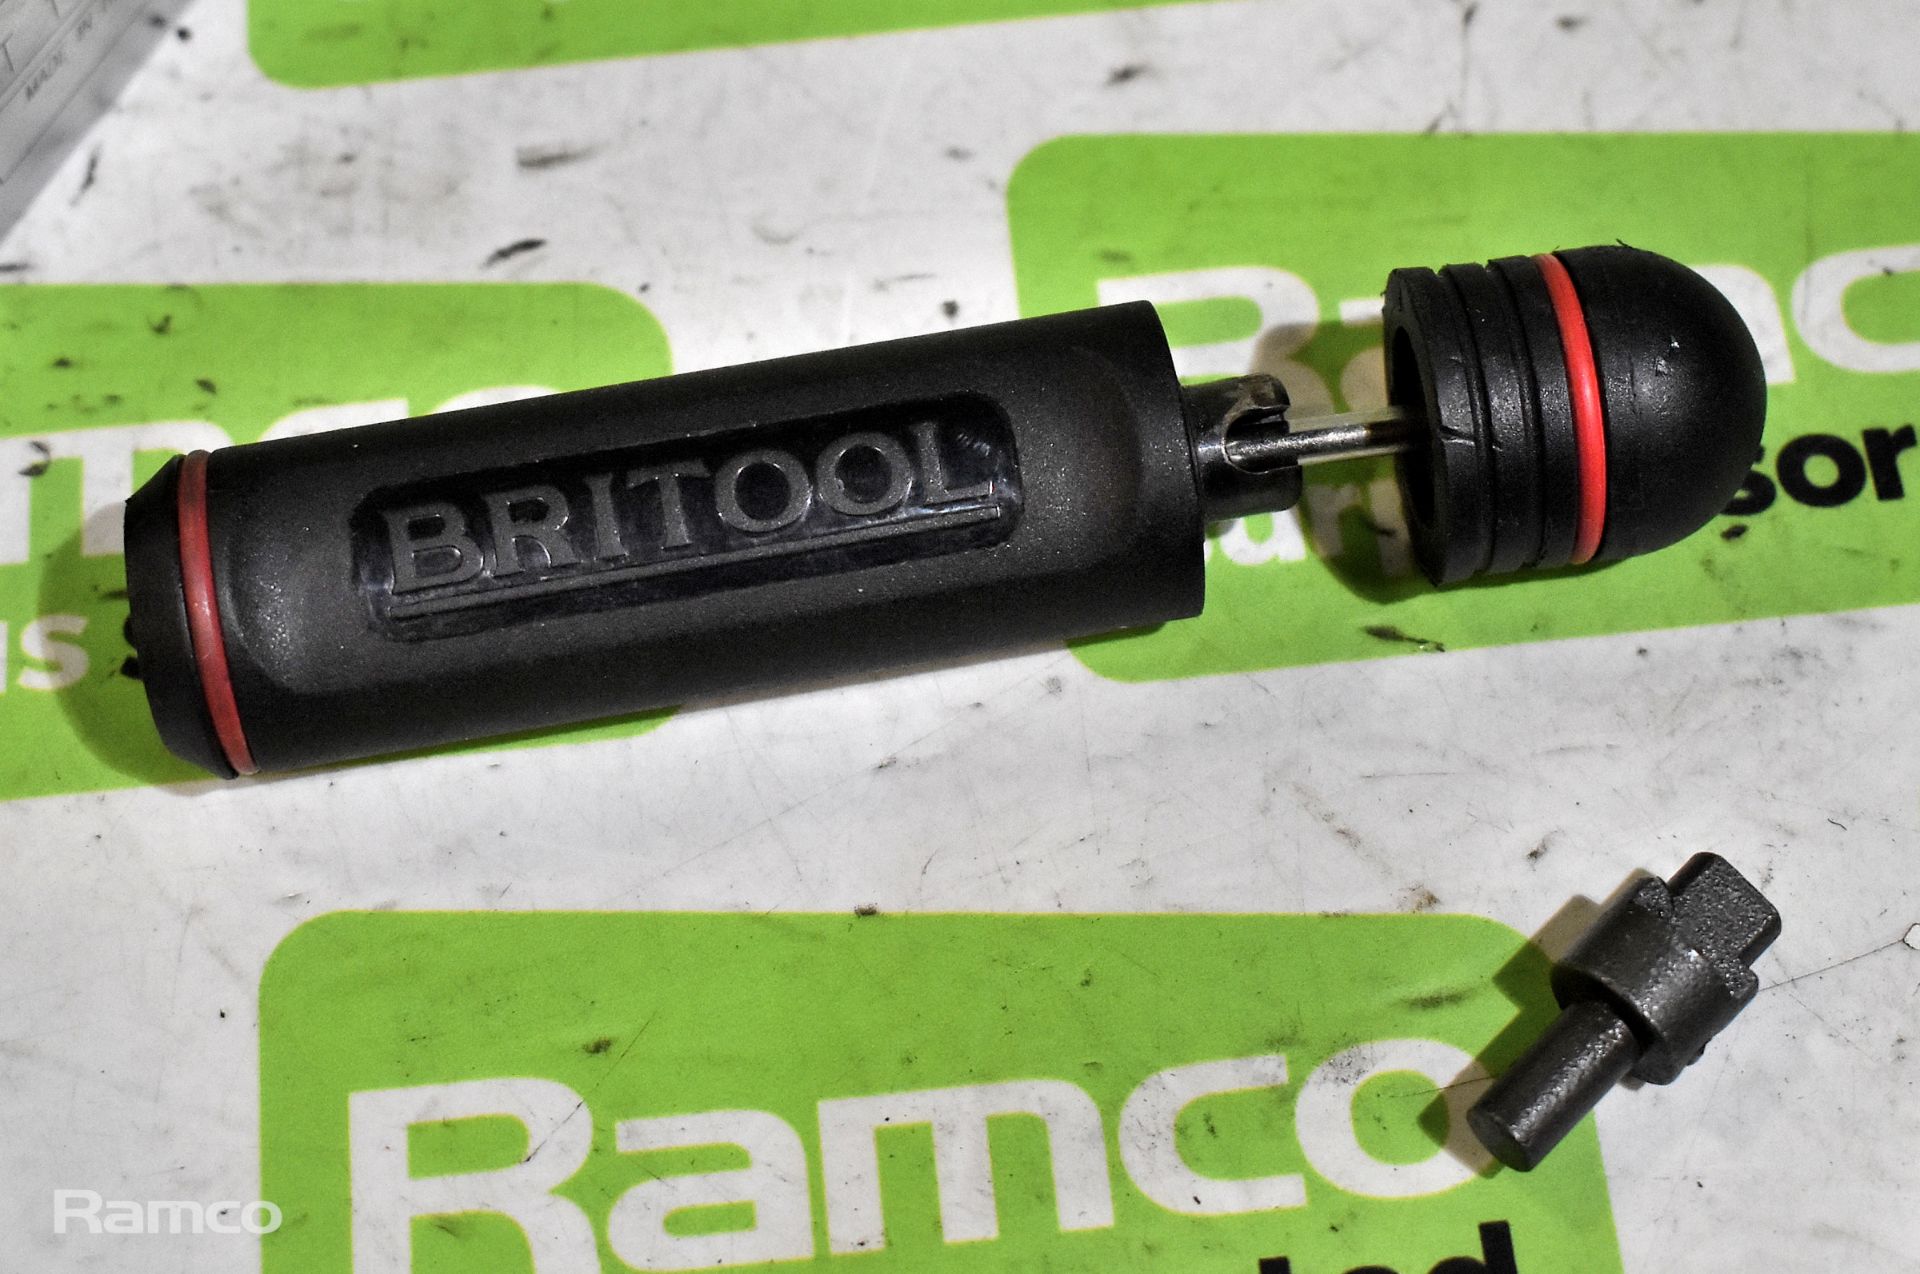 Britool torque wrench 2.5-1Nm - Image 3 of 3